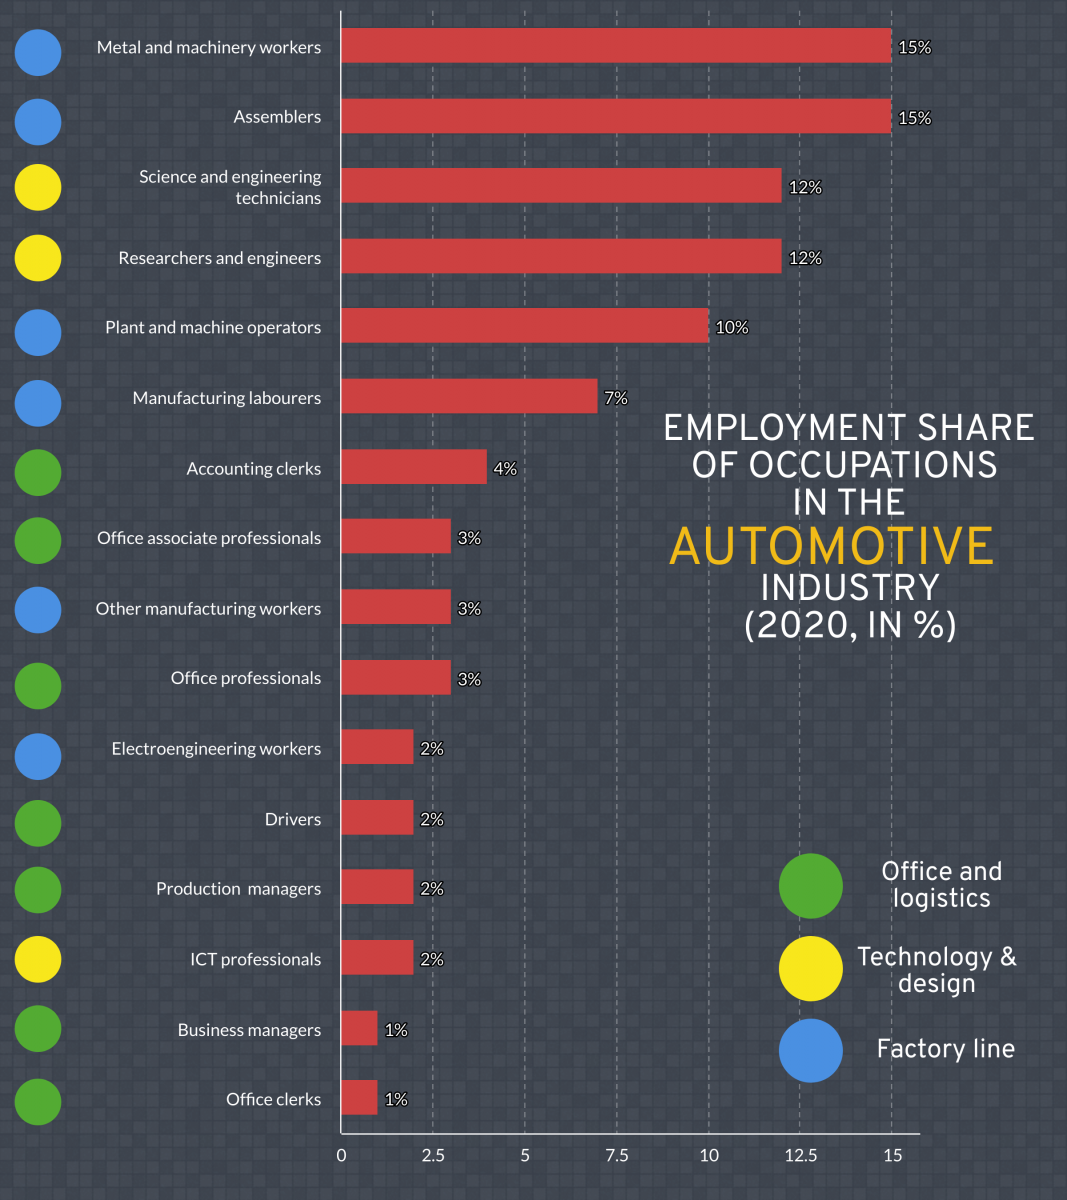 Figure 7: Occupations in the automotive industry (2020 employment share)